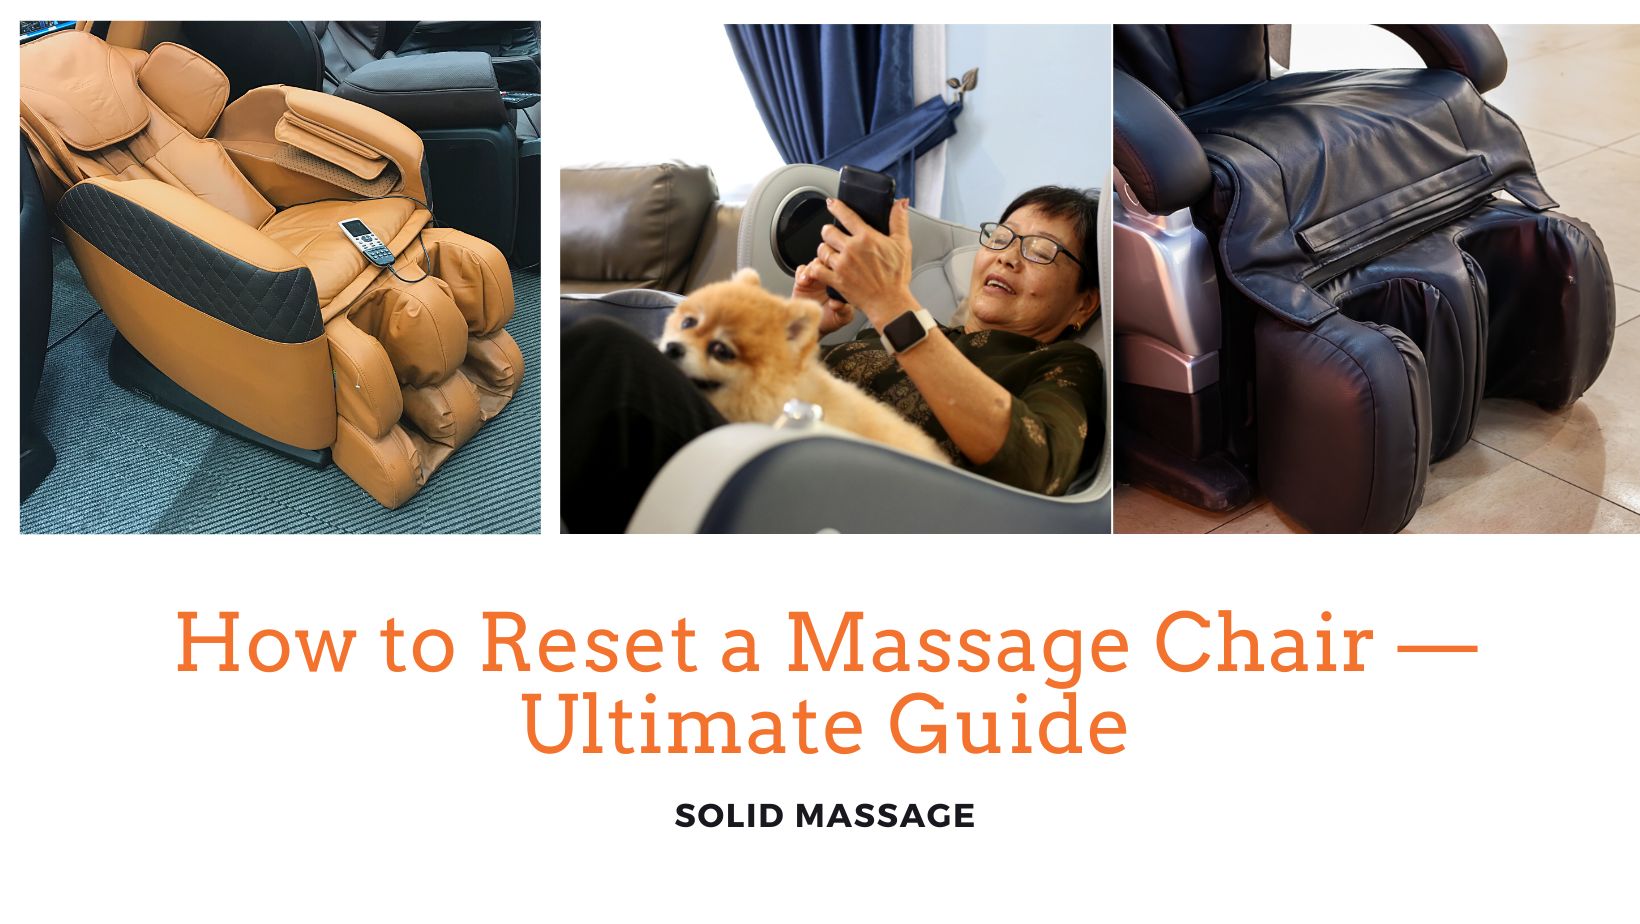 How to Reset a Massage Chair